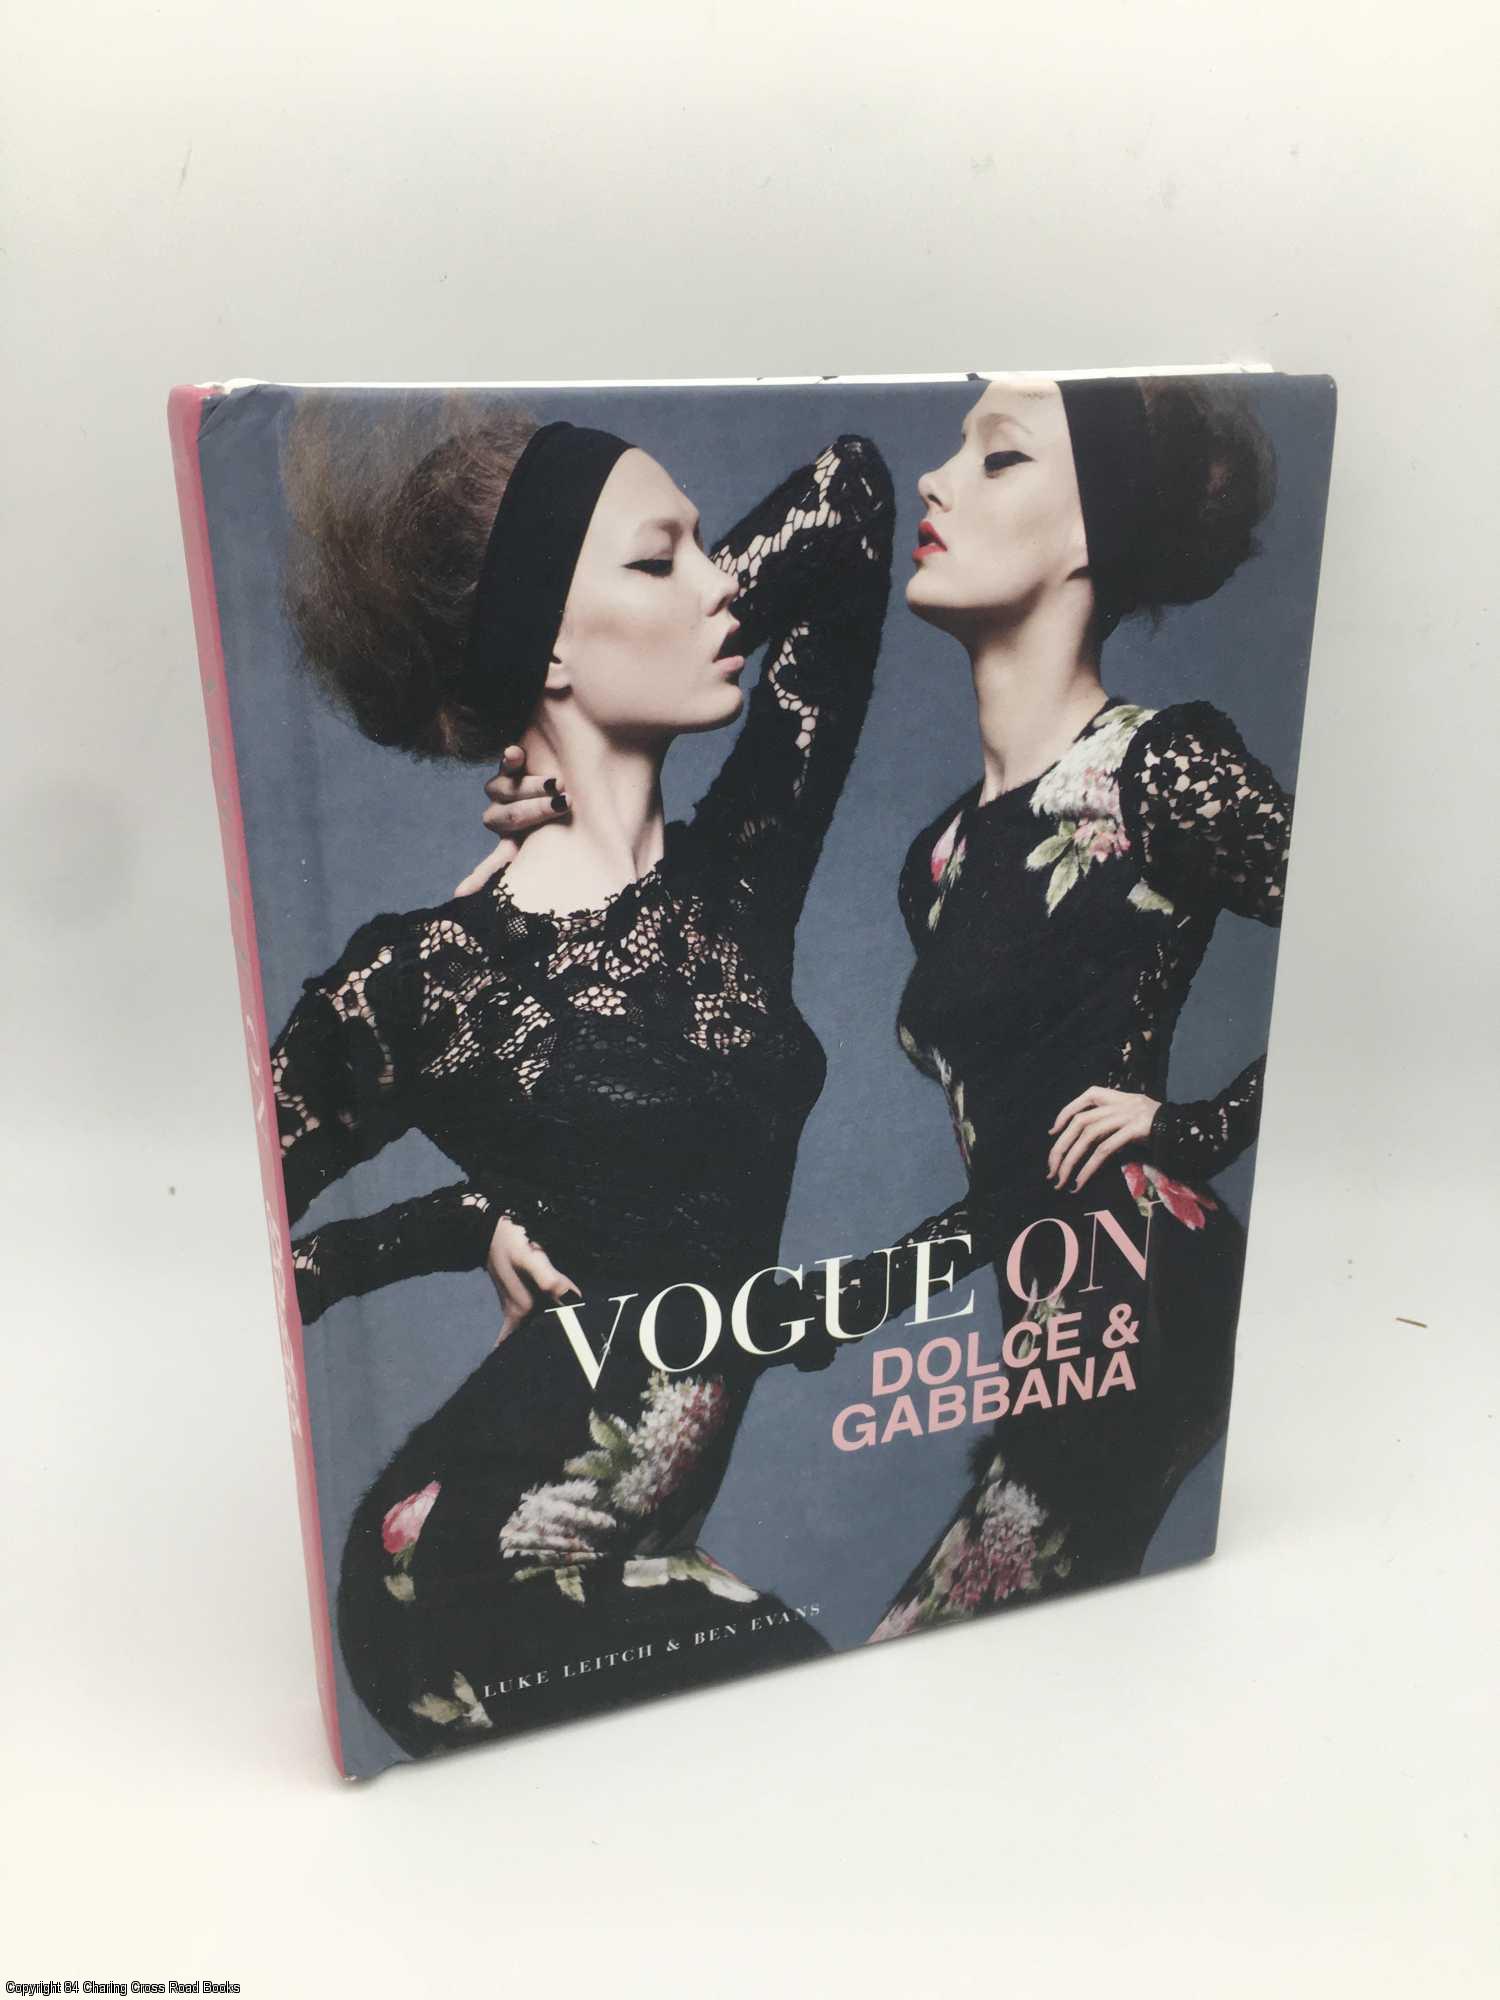 Vogue on: Dolce & Gabbana by Luke Leitch on 84 Charing Cross Rare Books